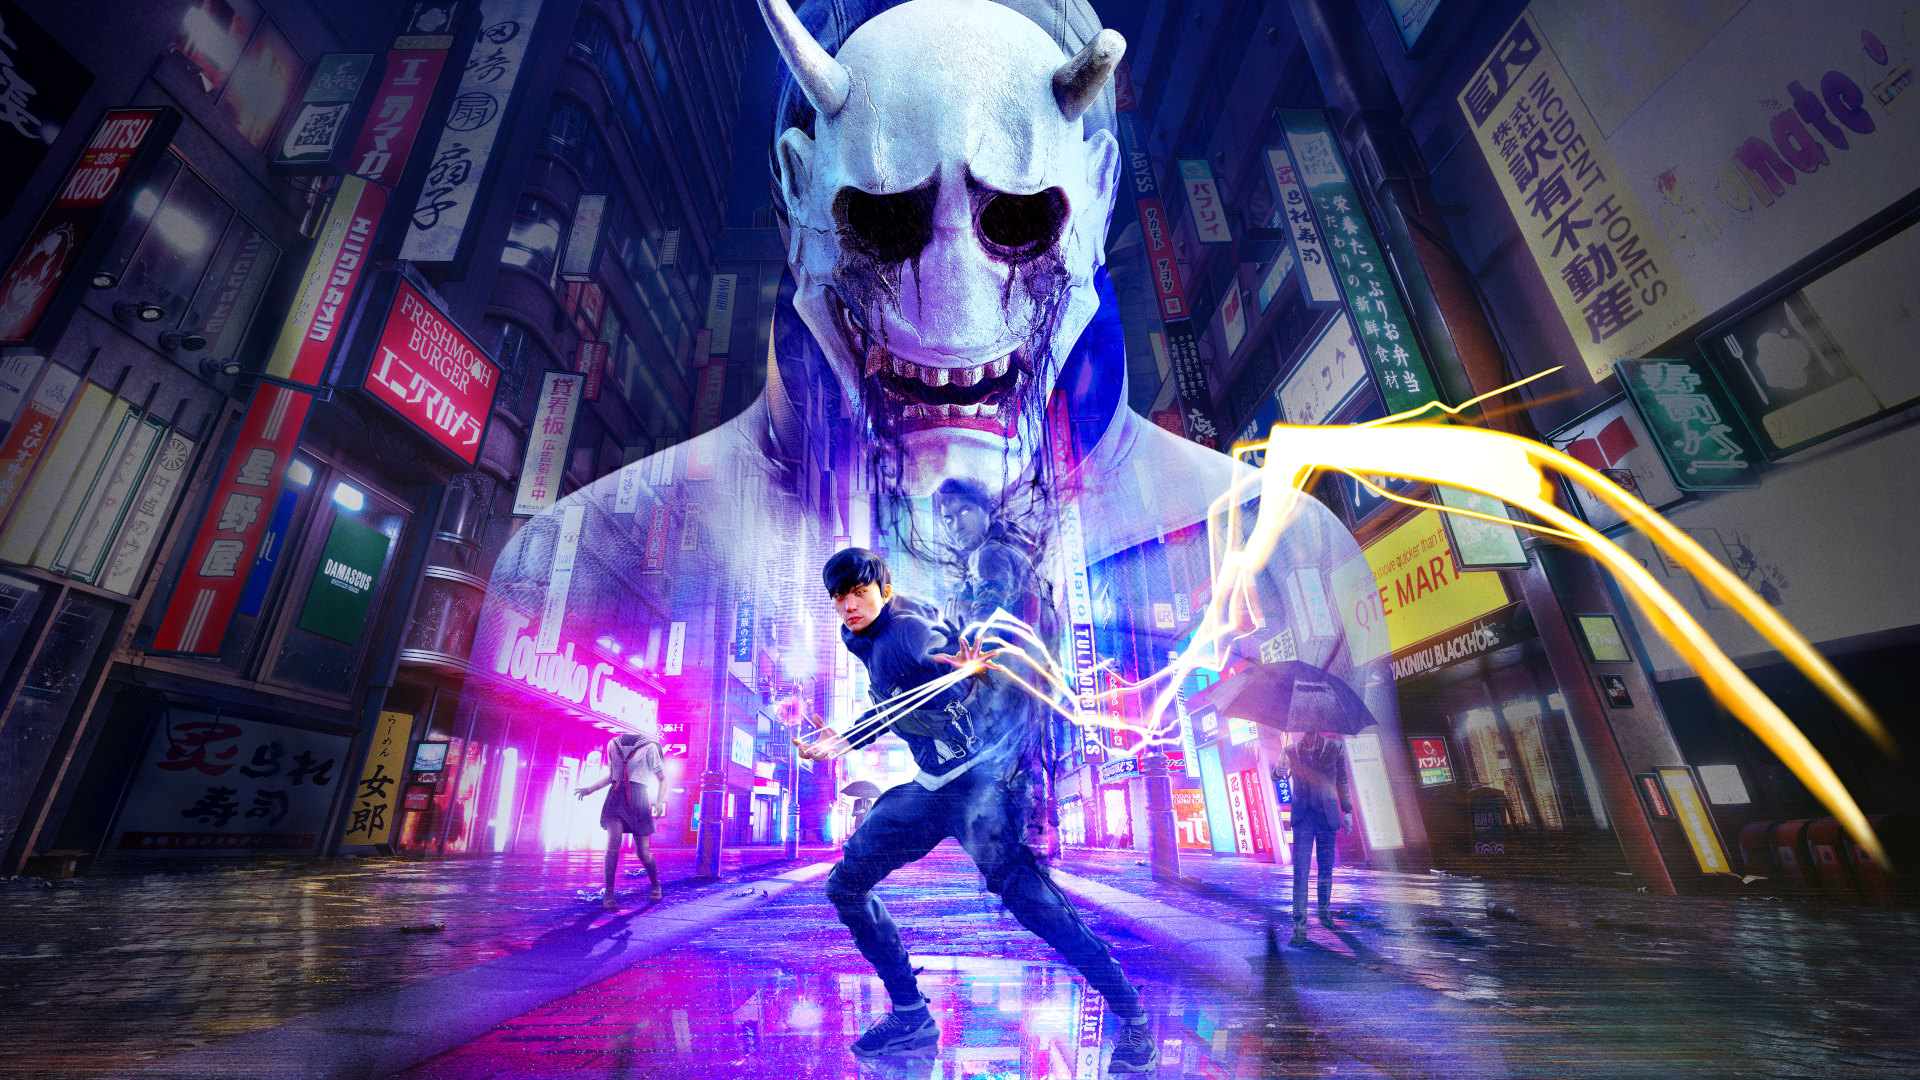 A promo image showing the protagonist of Ghostwire Tokyo while a villain in a white, hannya masks looms behind him